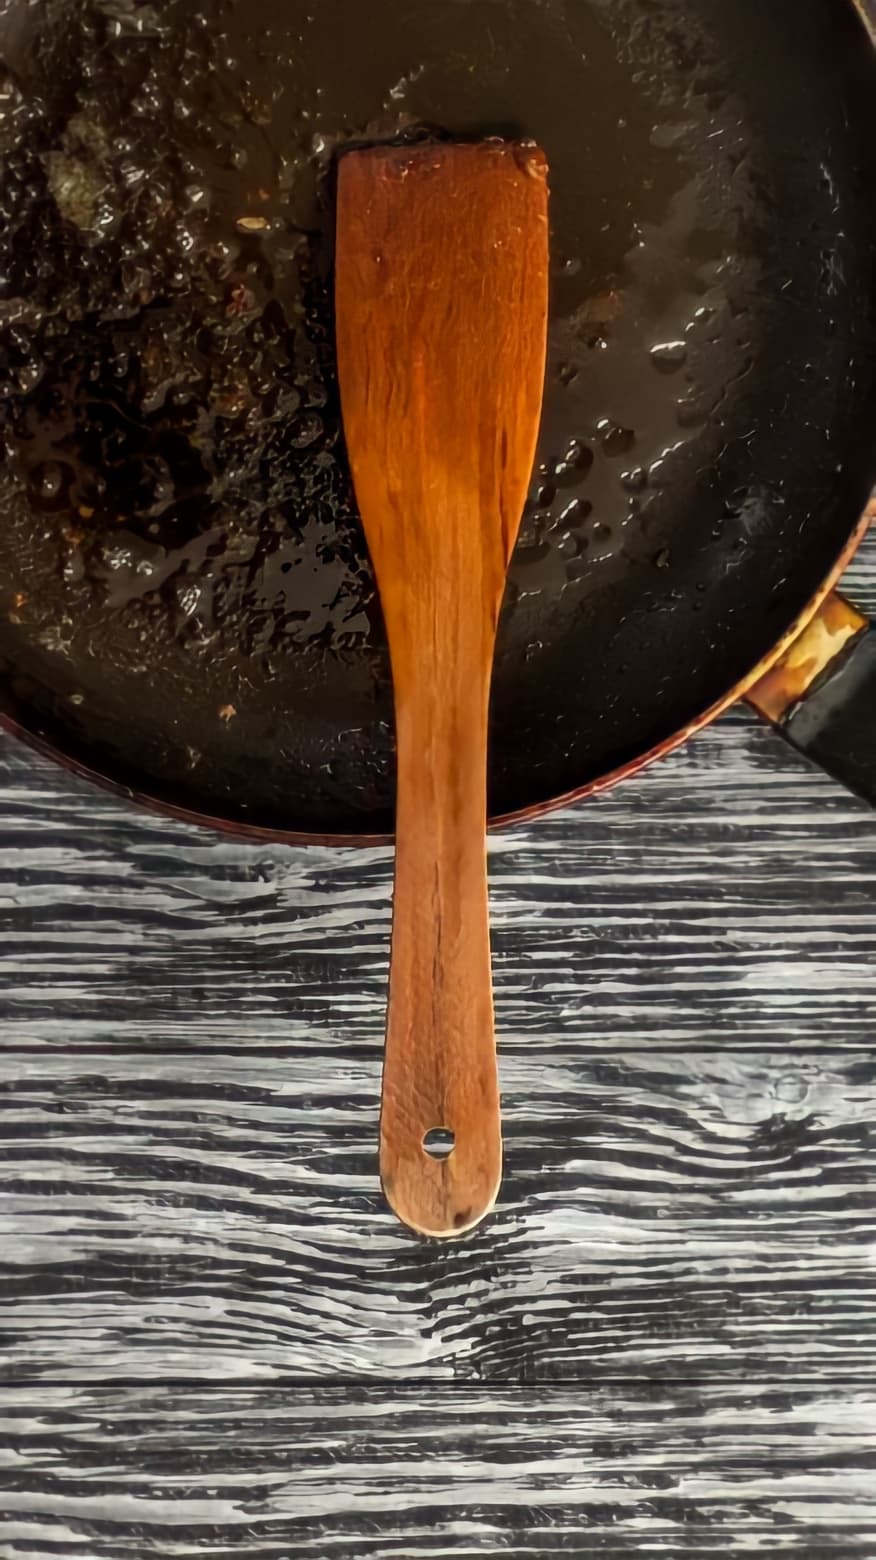 Burnt sugar in a pan with a wooden spatula